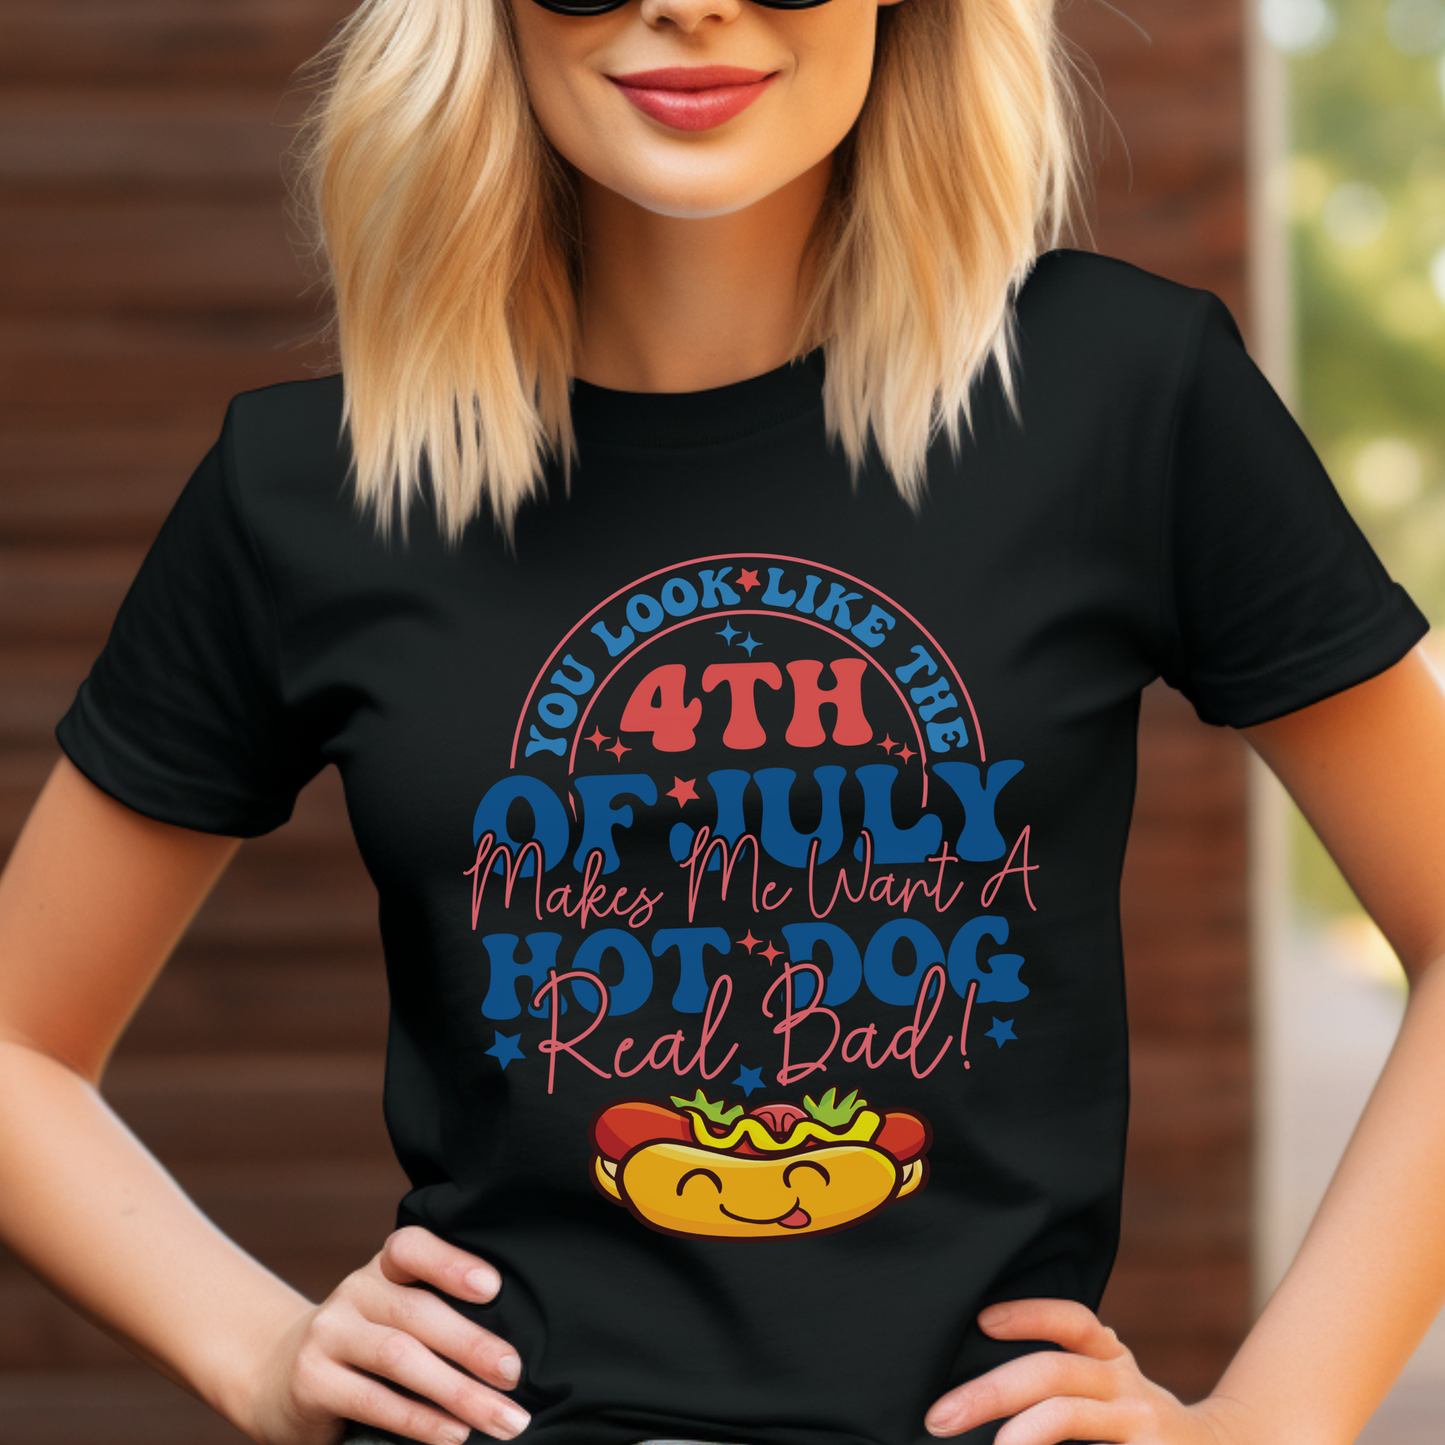 Cute You Look Like The 4th Of July, Makes Me Want A Hot Dog Real Bad Shirt